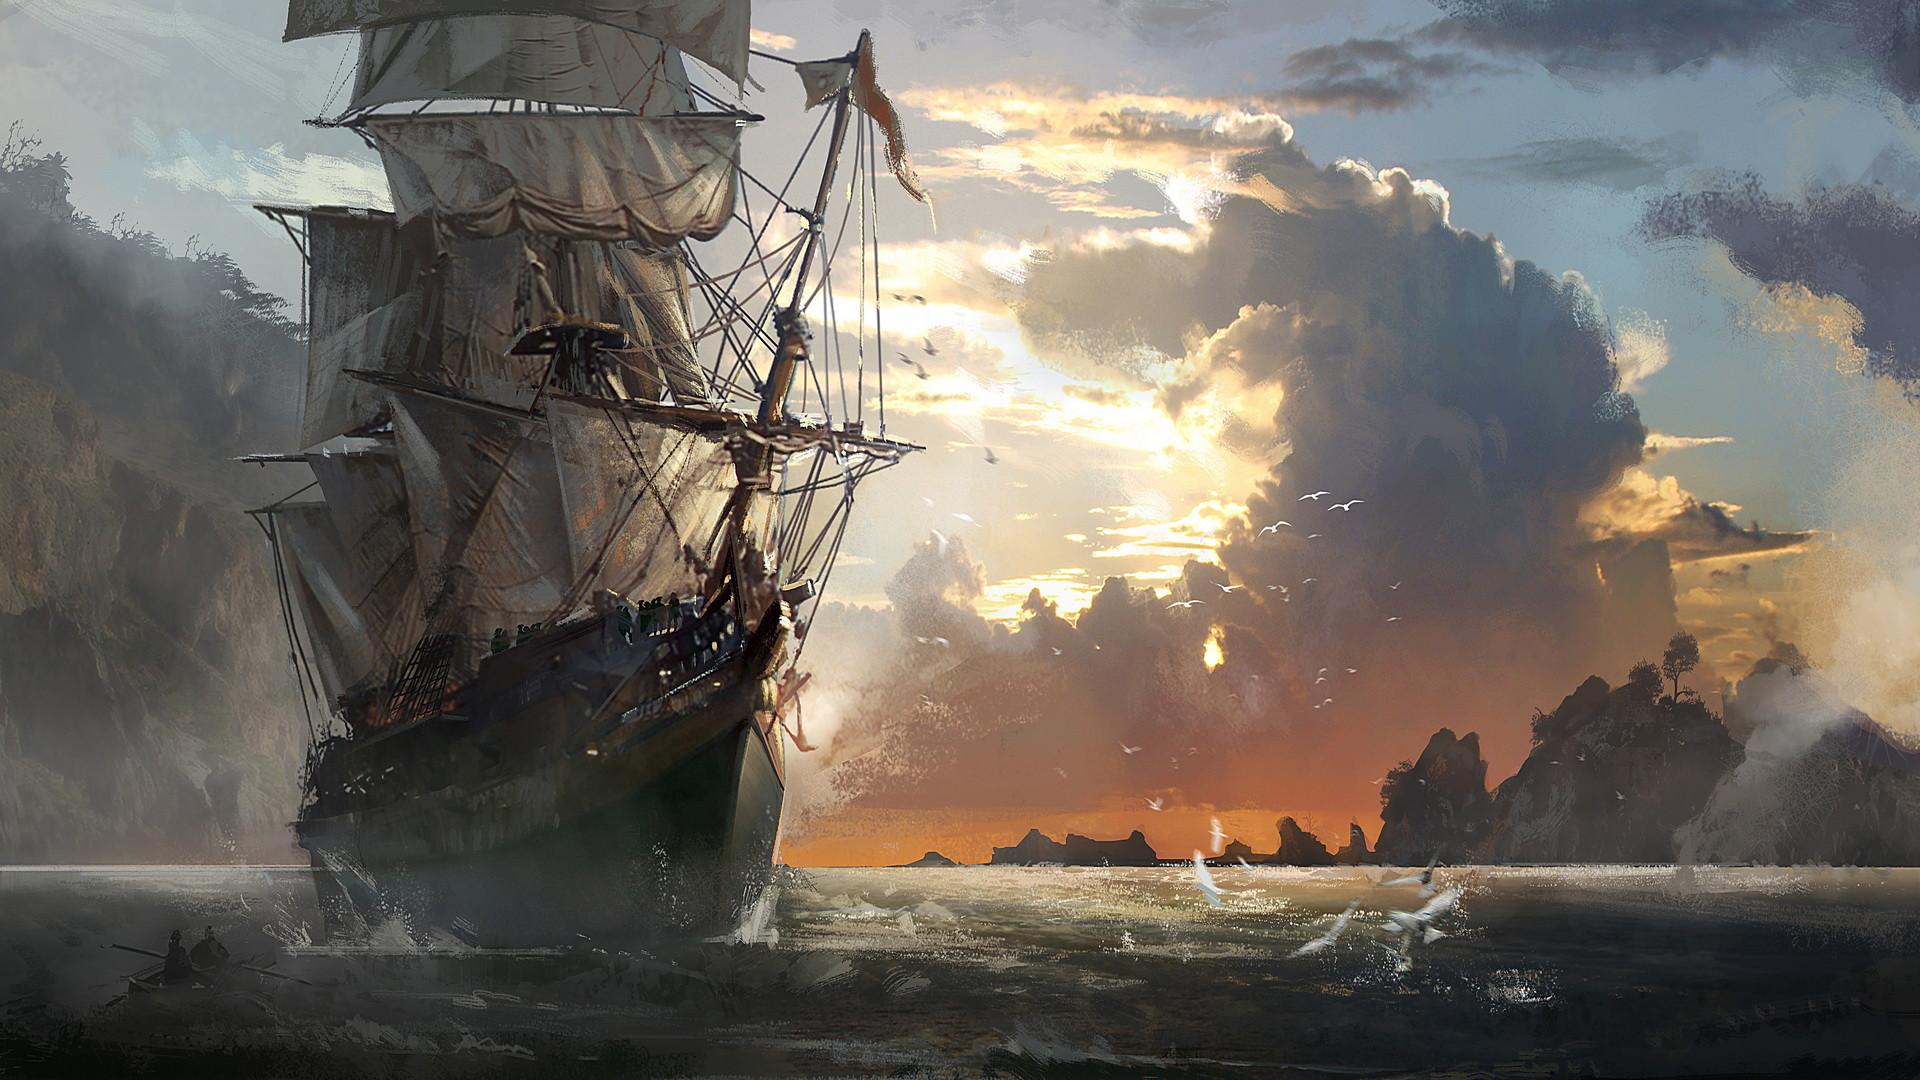 1920 x 1080 · jpeg - Pirate Ship Wallpapers for Desktop (65+ images)